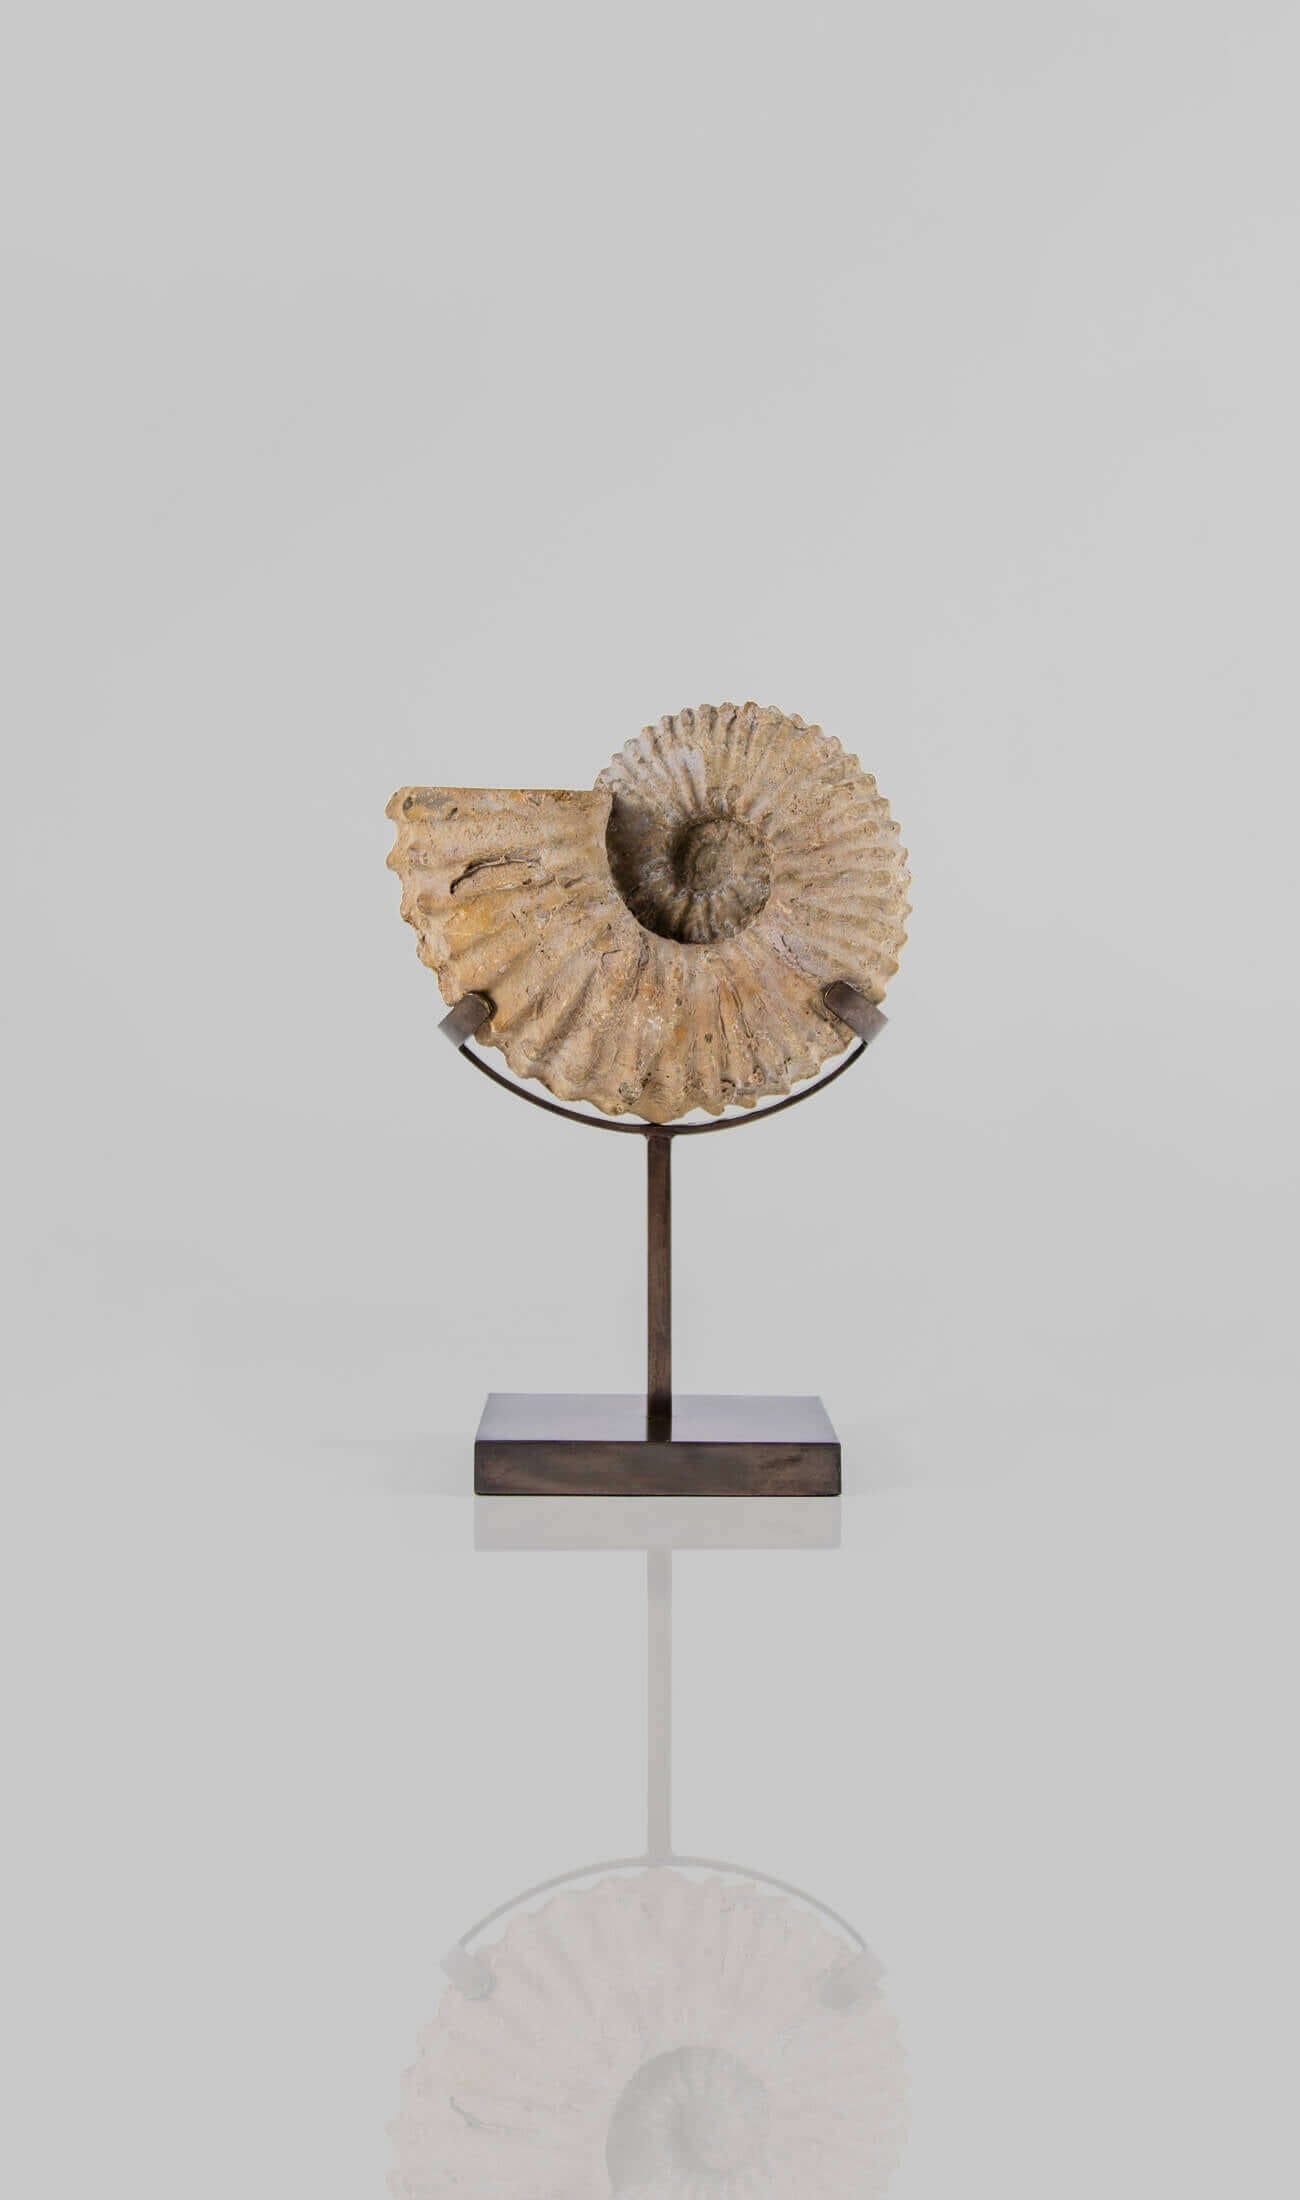 A wonderful Calycoceras asiaticum ammonite measuring 205mm transformed on AES bronze stand at THE FOSSIL STORE